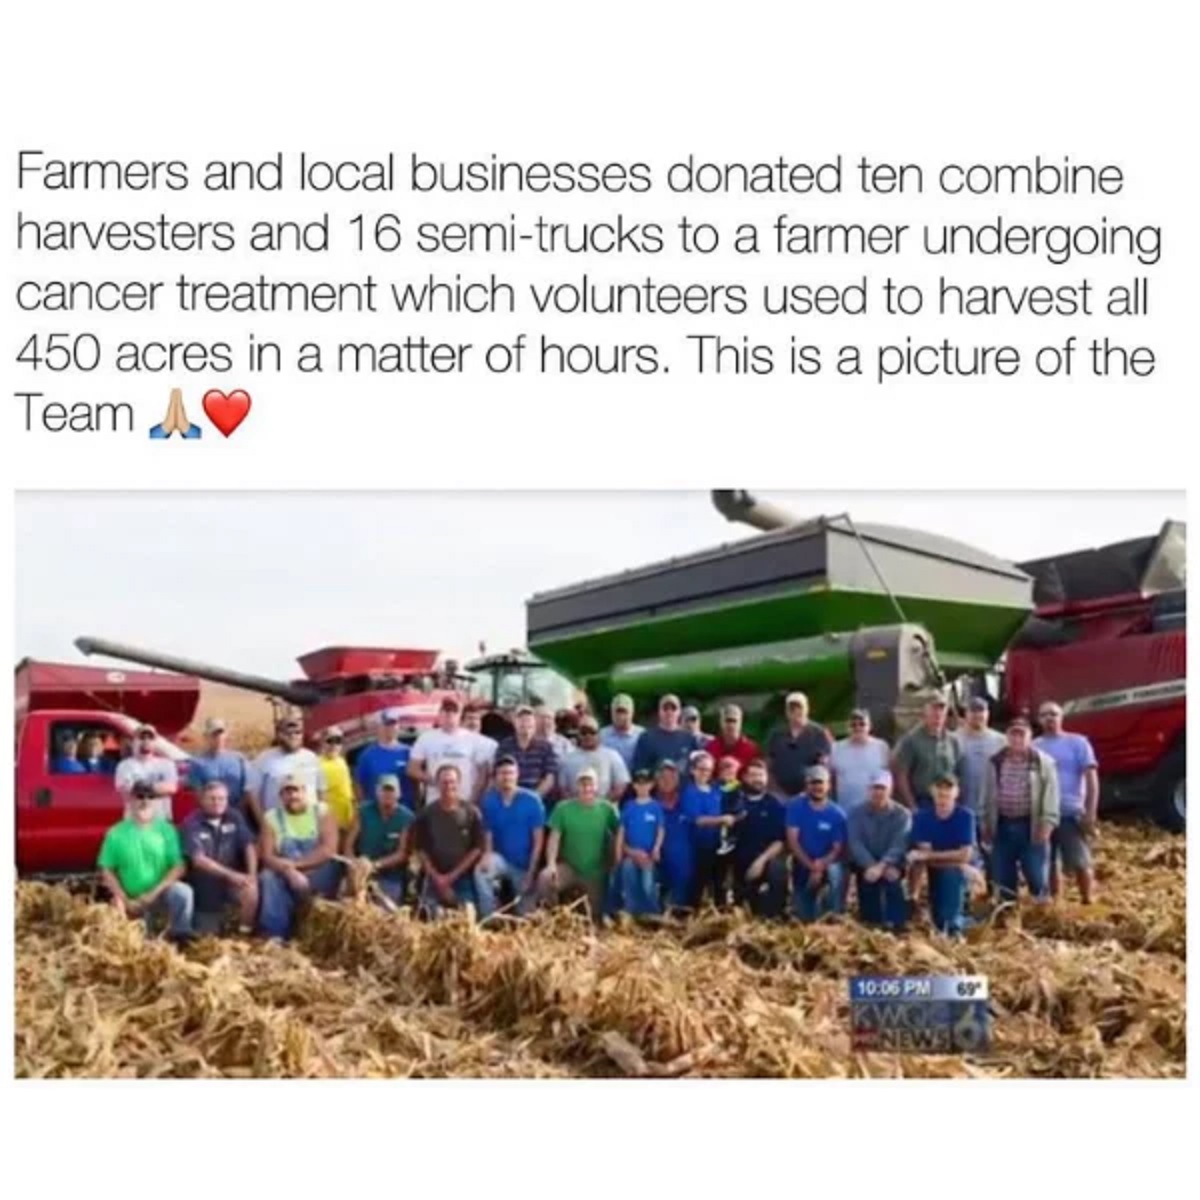 community - Farmers and local businesses donated ten combine harvesters and 16 semitrucks to a farmer undergoing cancer treatment which volunteers used to harvest all 450 acres in a matter of hours. This is a picture of the Team A 69 News